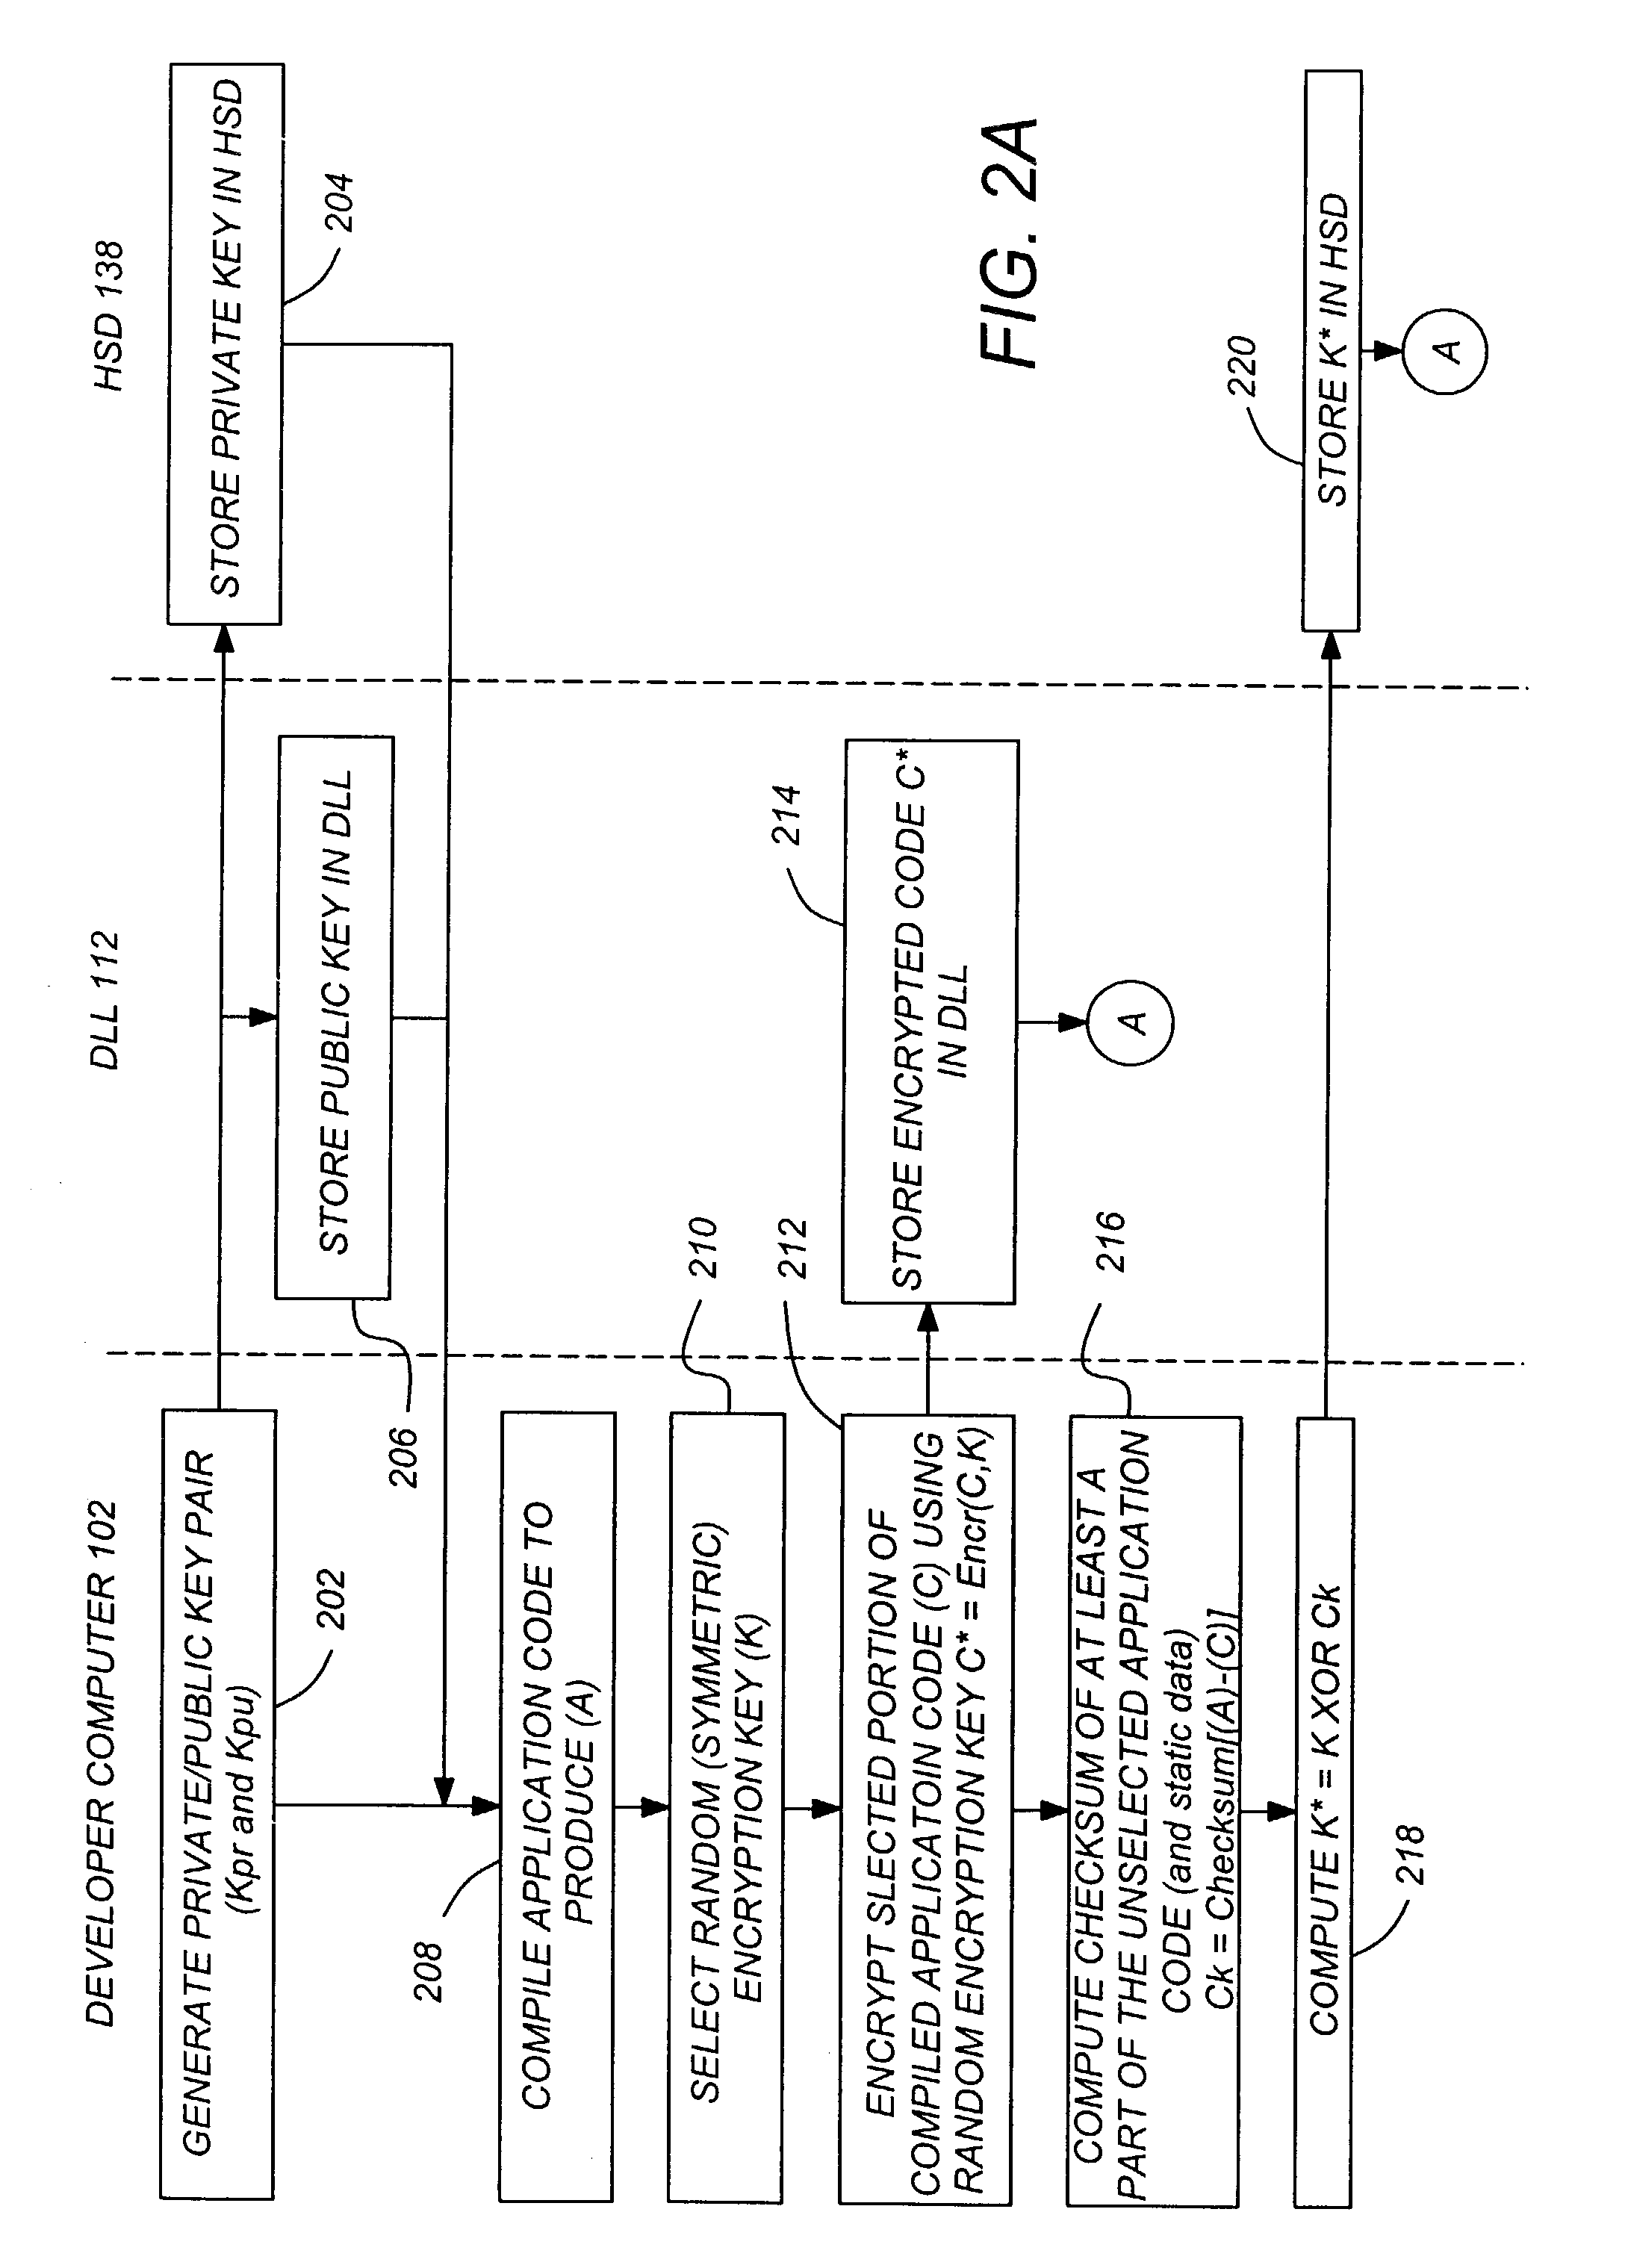 Software protection method utilizing hidden application code in a protection dynamic link library object